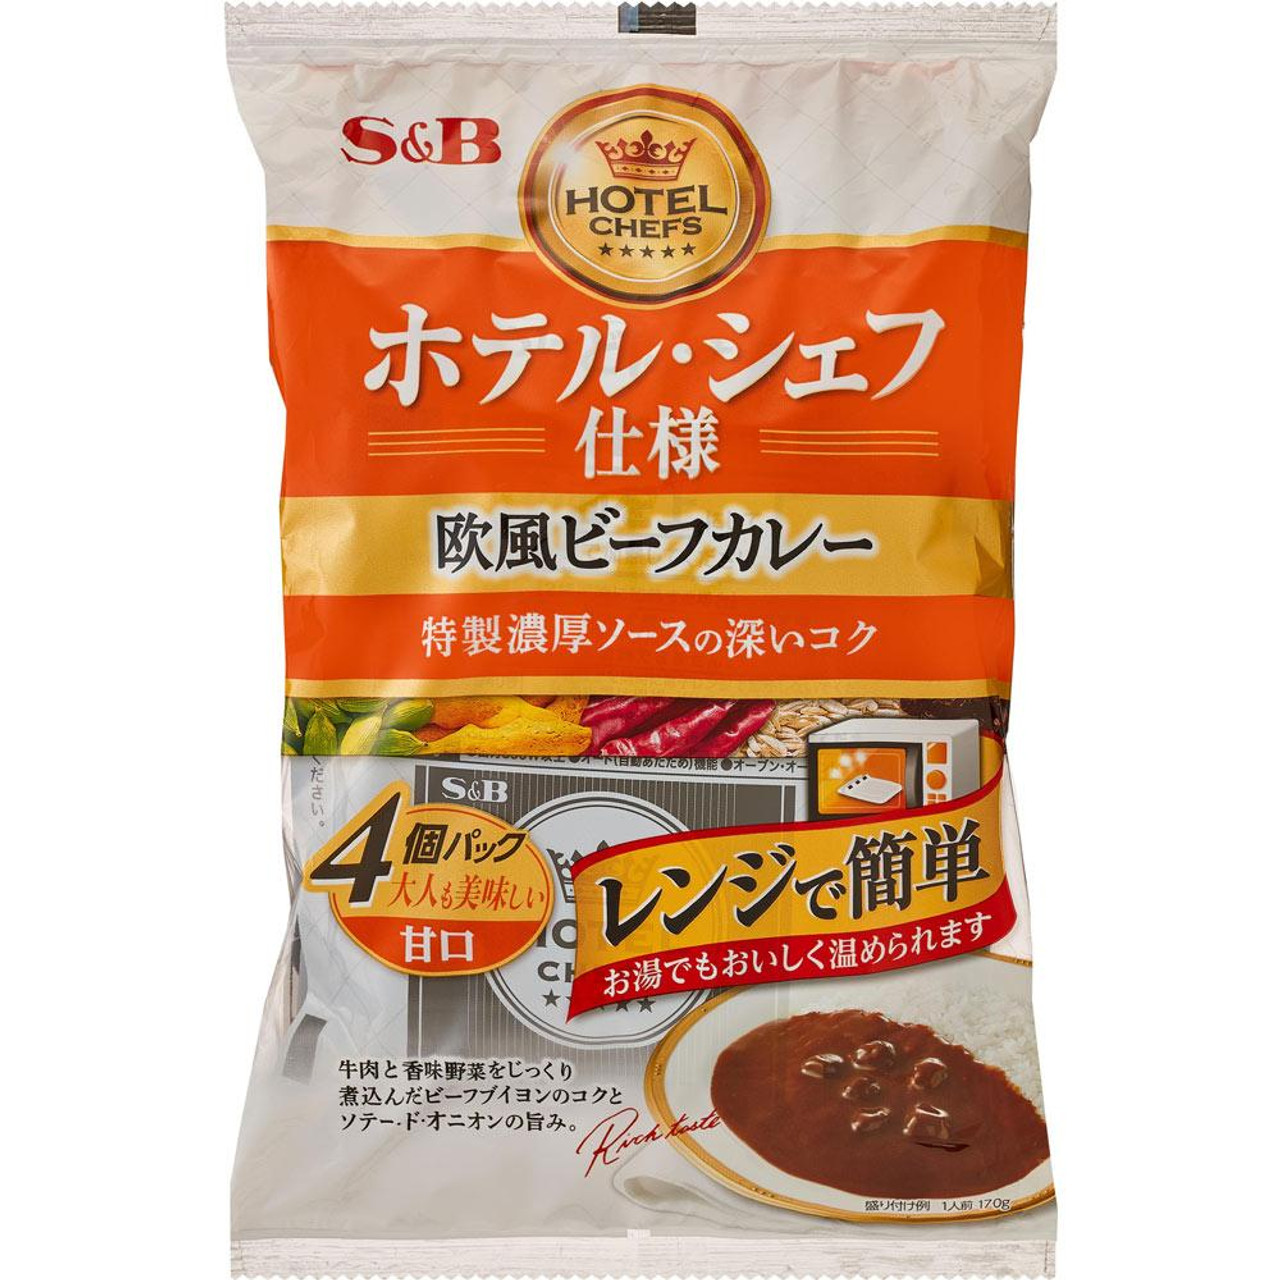 Chef　Beef　European　S　B　Hotel　680G　Curry　Pack　Of　Sweet